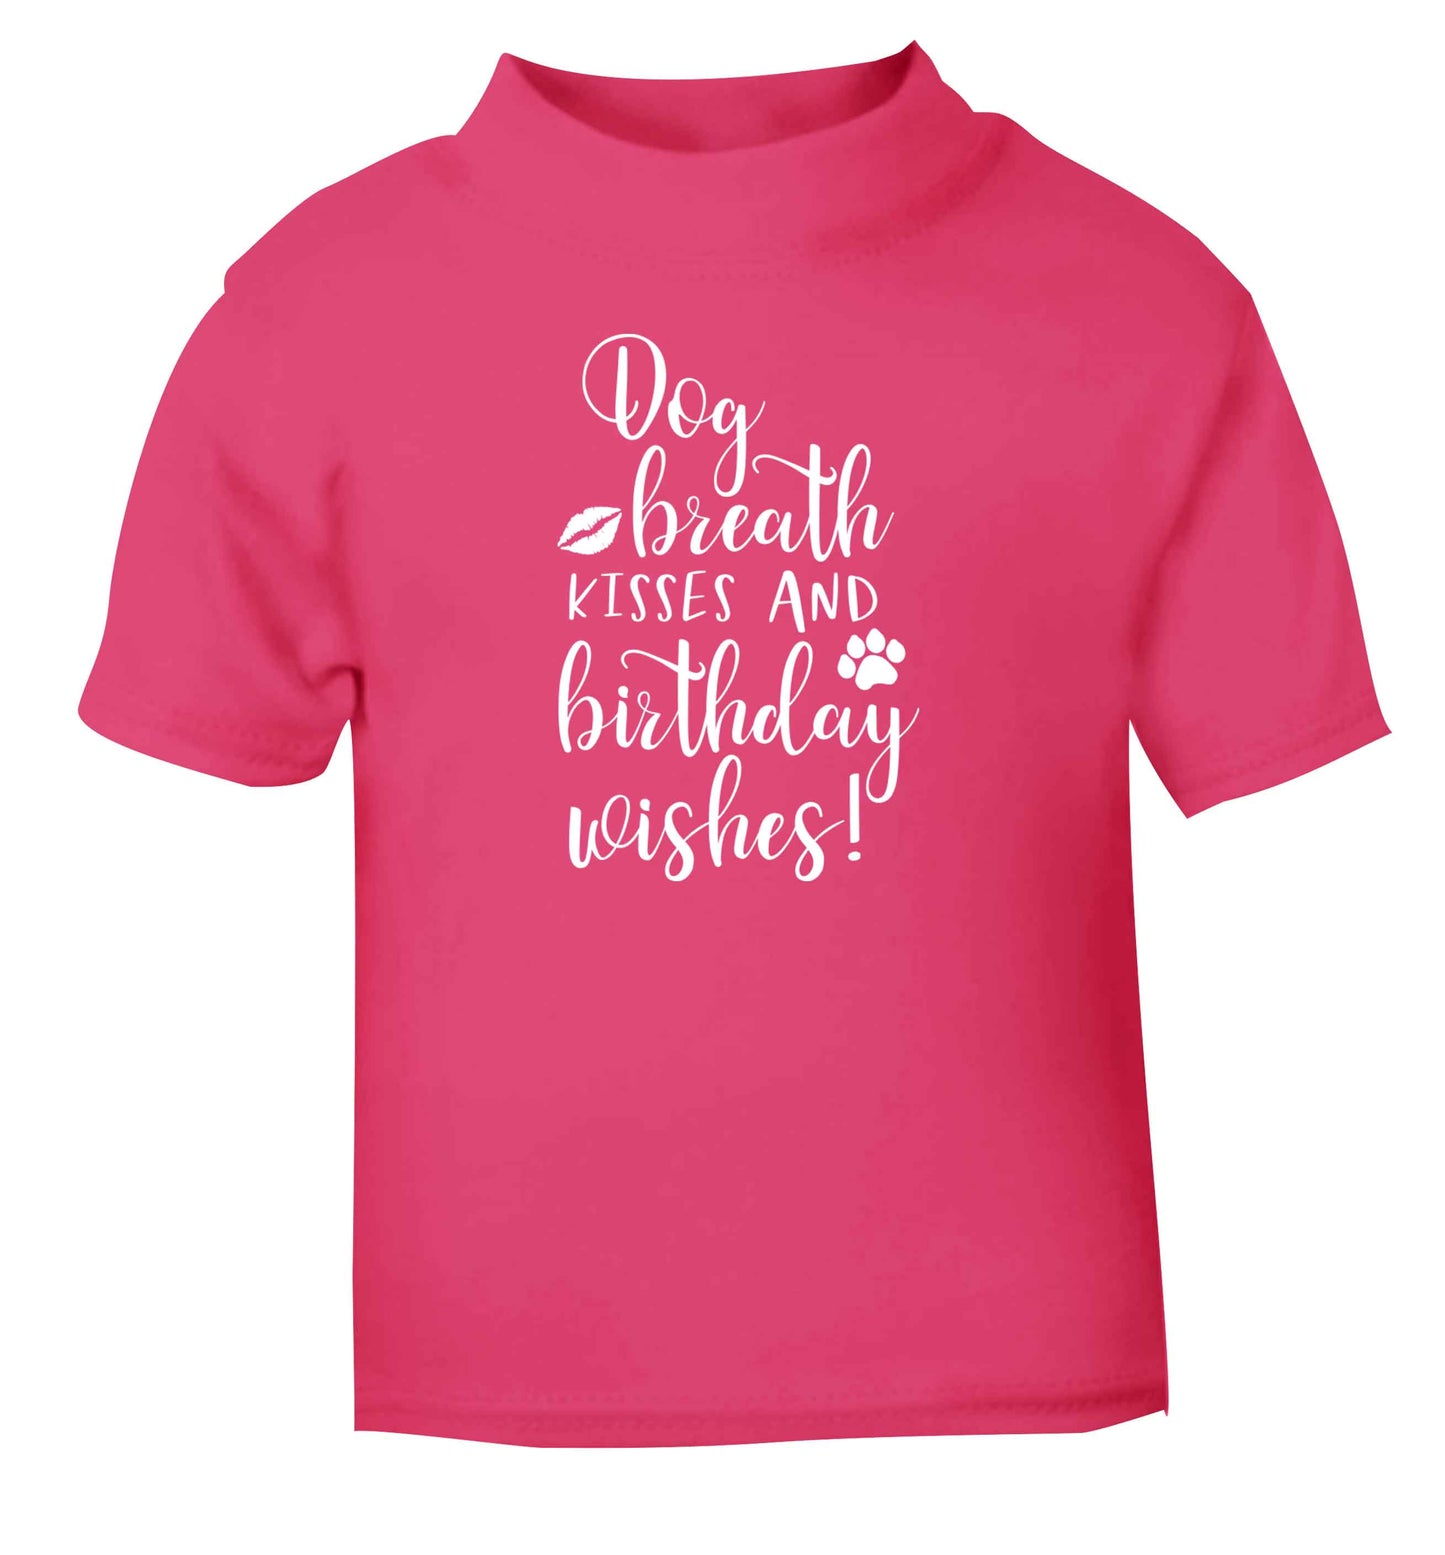 Dog breath kisses and christmas wishes pink Baby Toddler Tshirt 2 Years